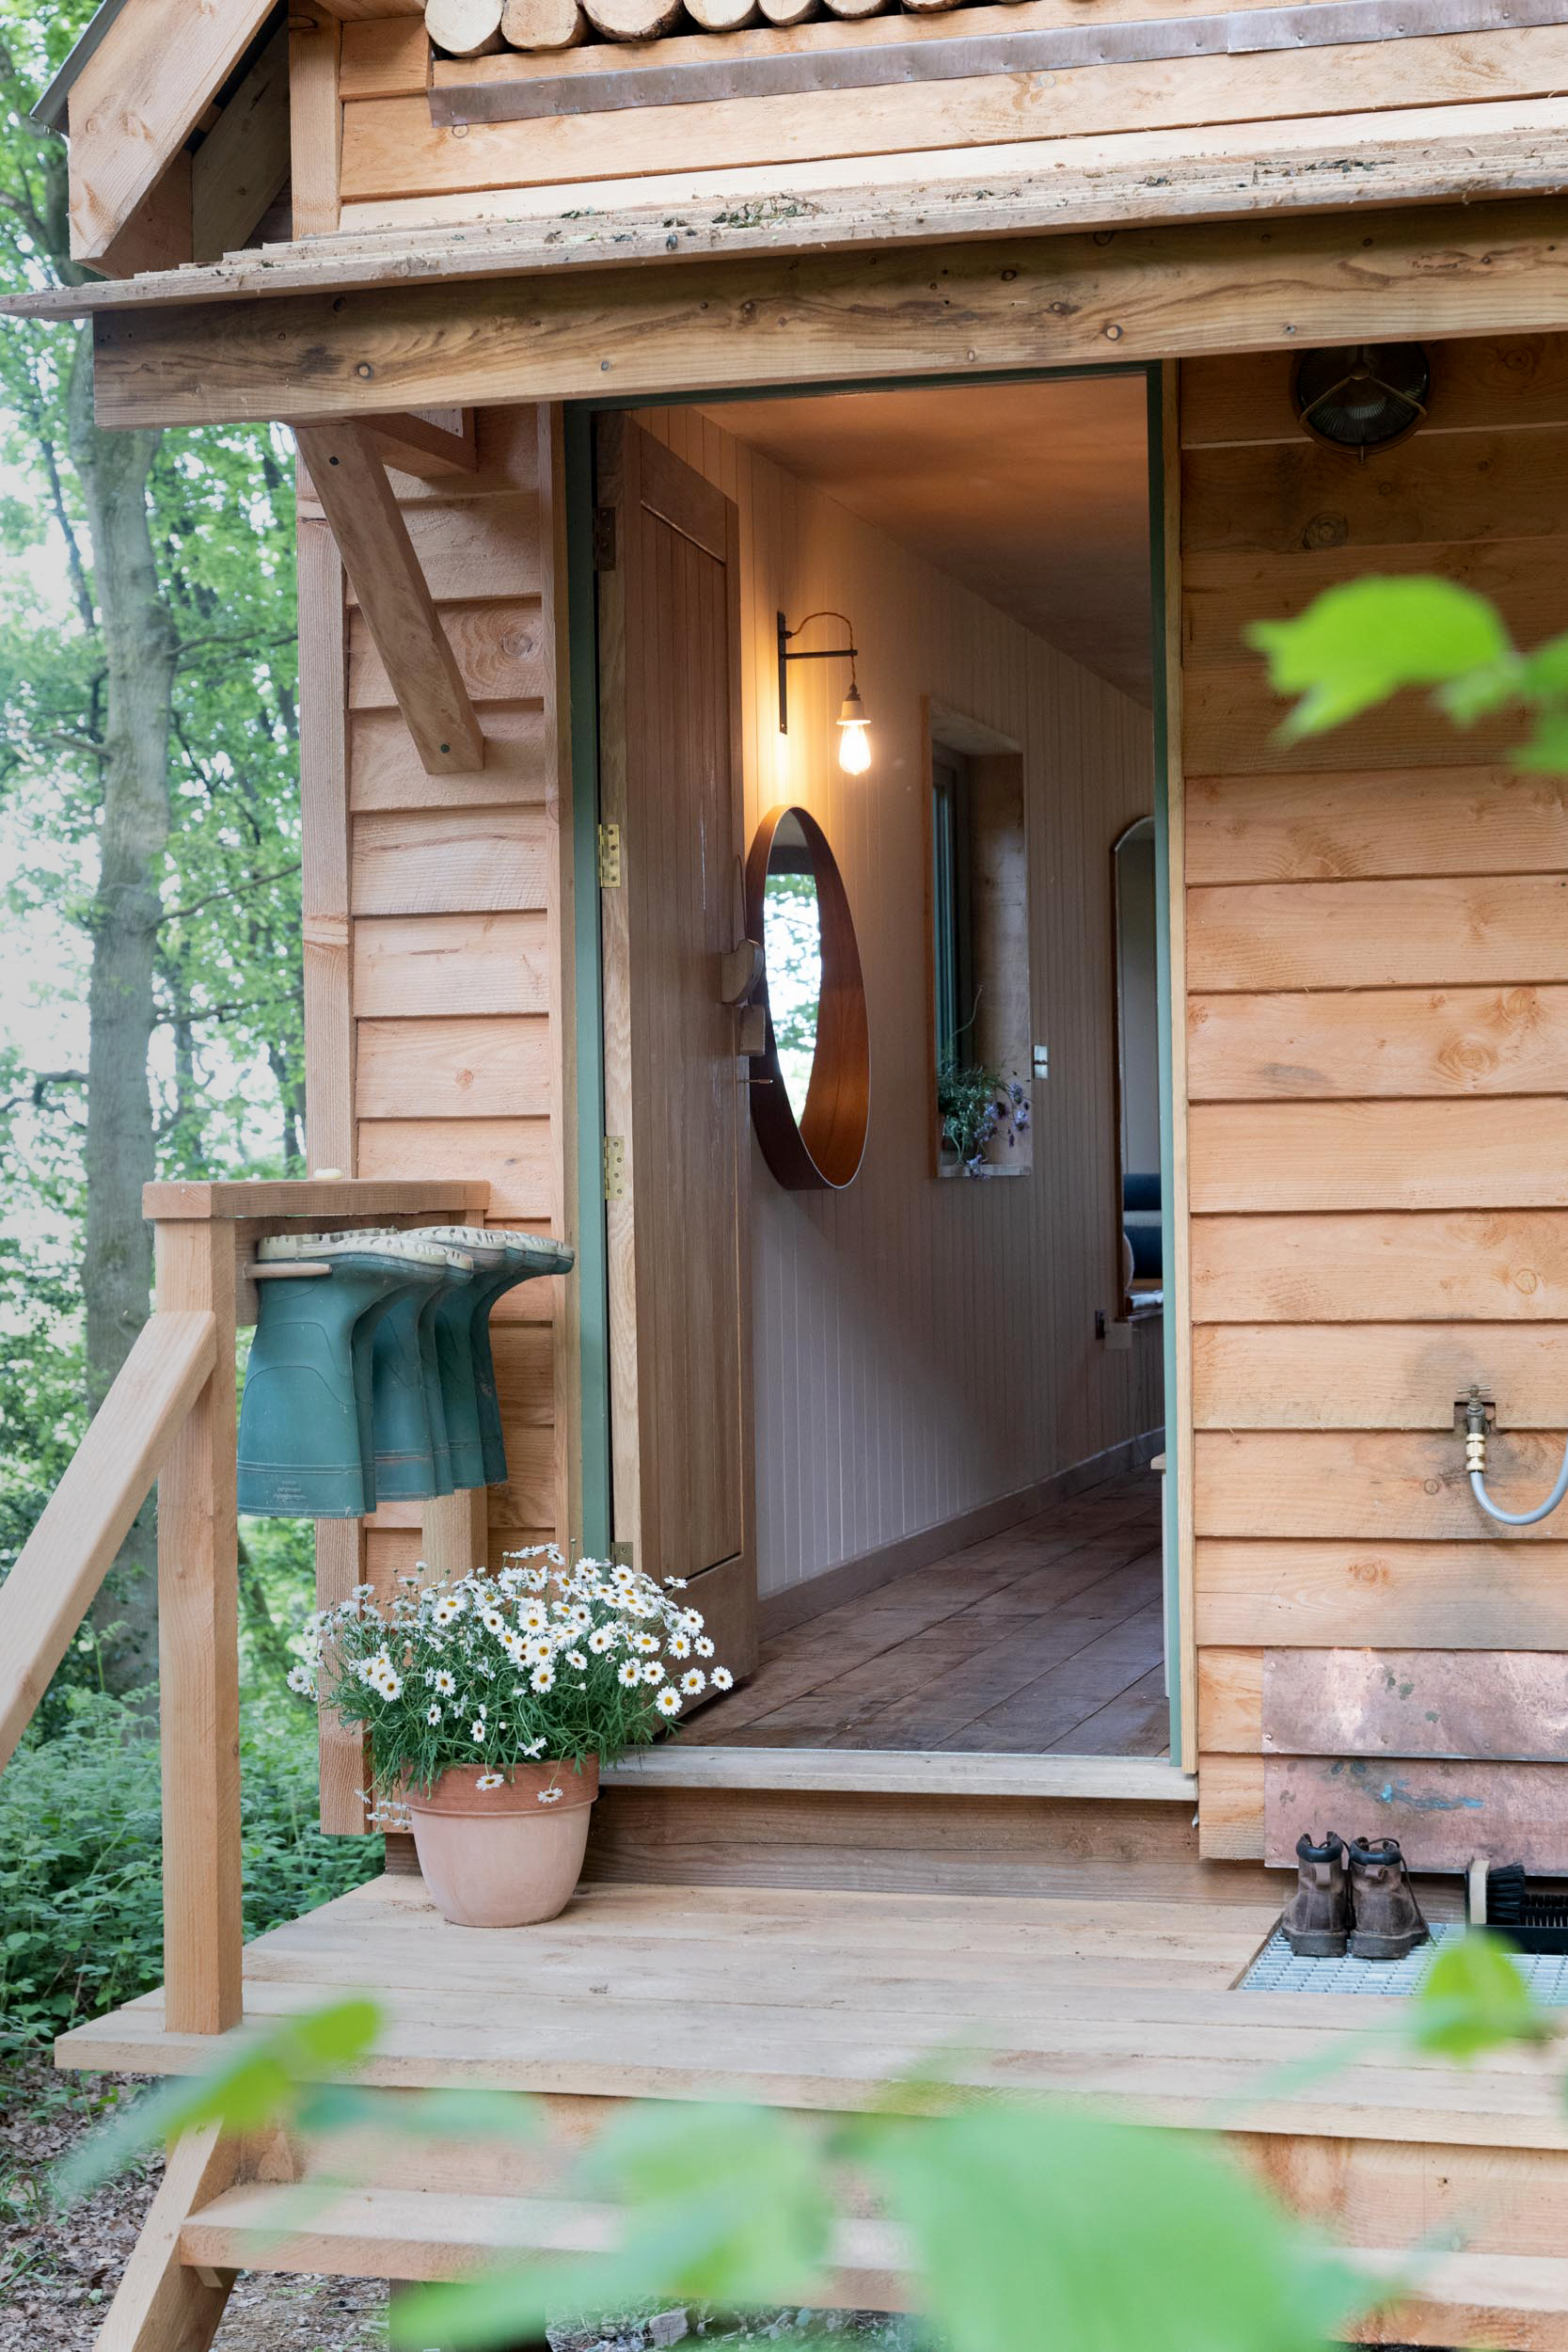 Entry to The Quist, a tree cabin rental in Herefordshire, England. Luke Atkinson photo.